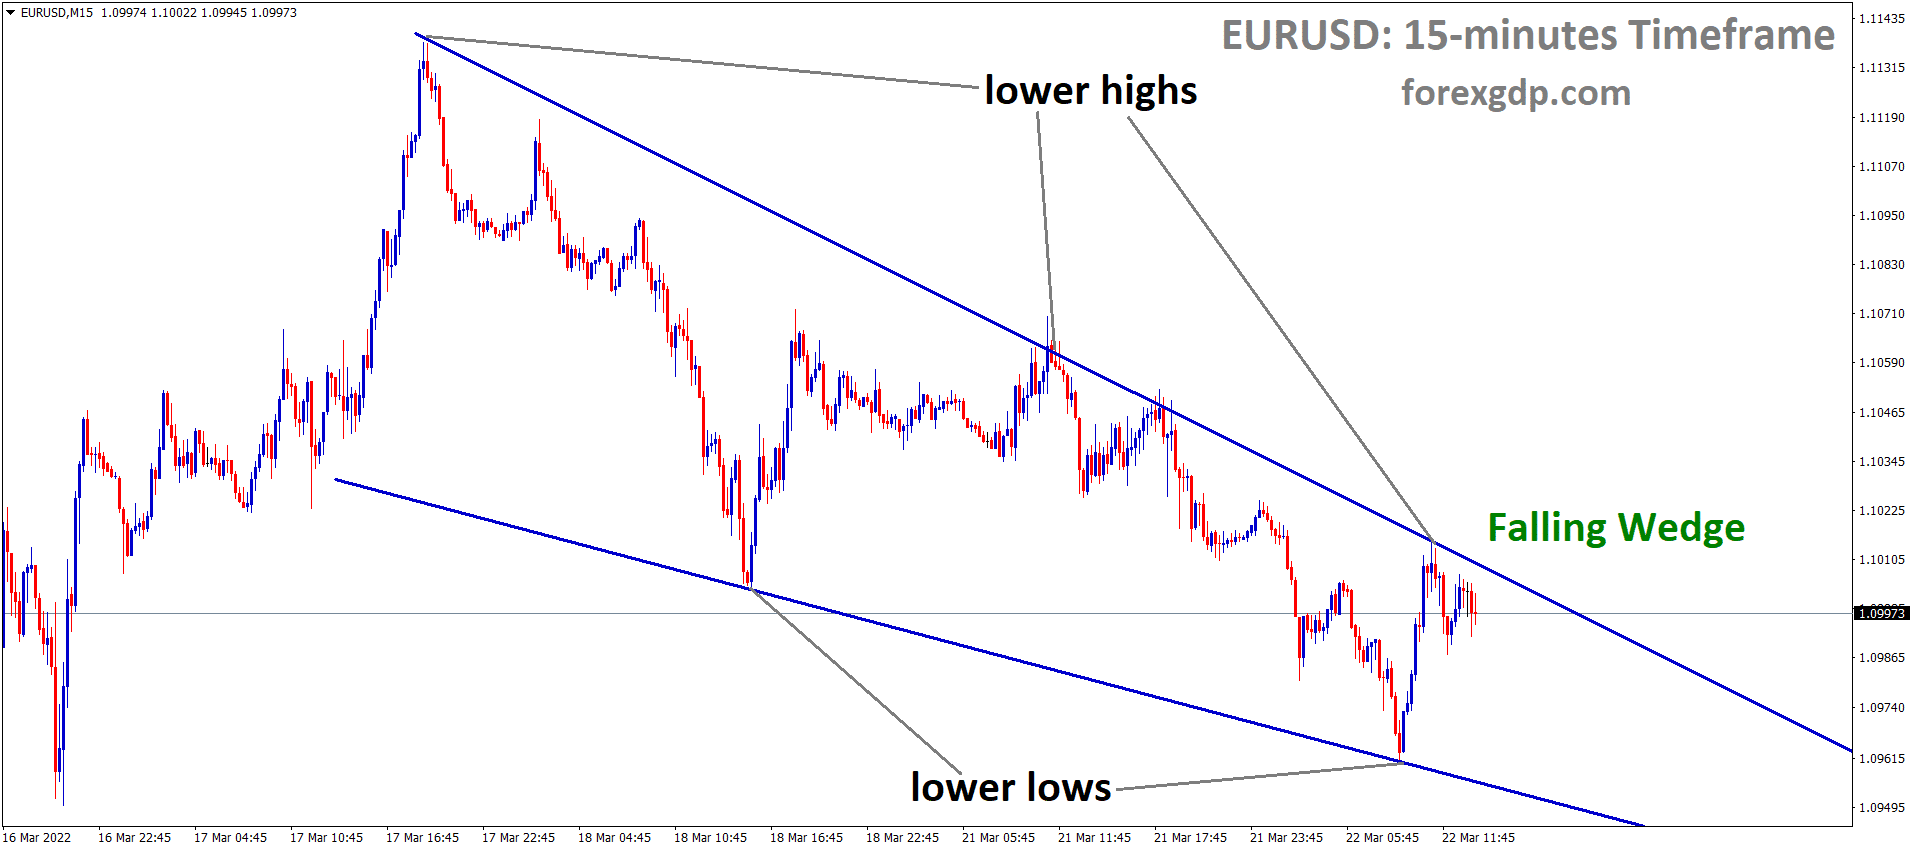 EURUSD M15 Market has reached the lower high area of the Falling Wedge Pattern.